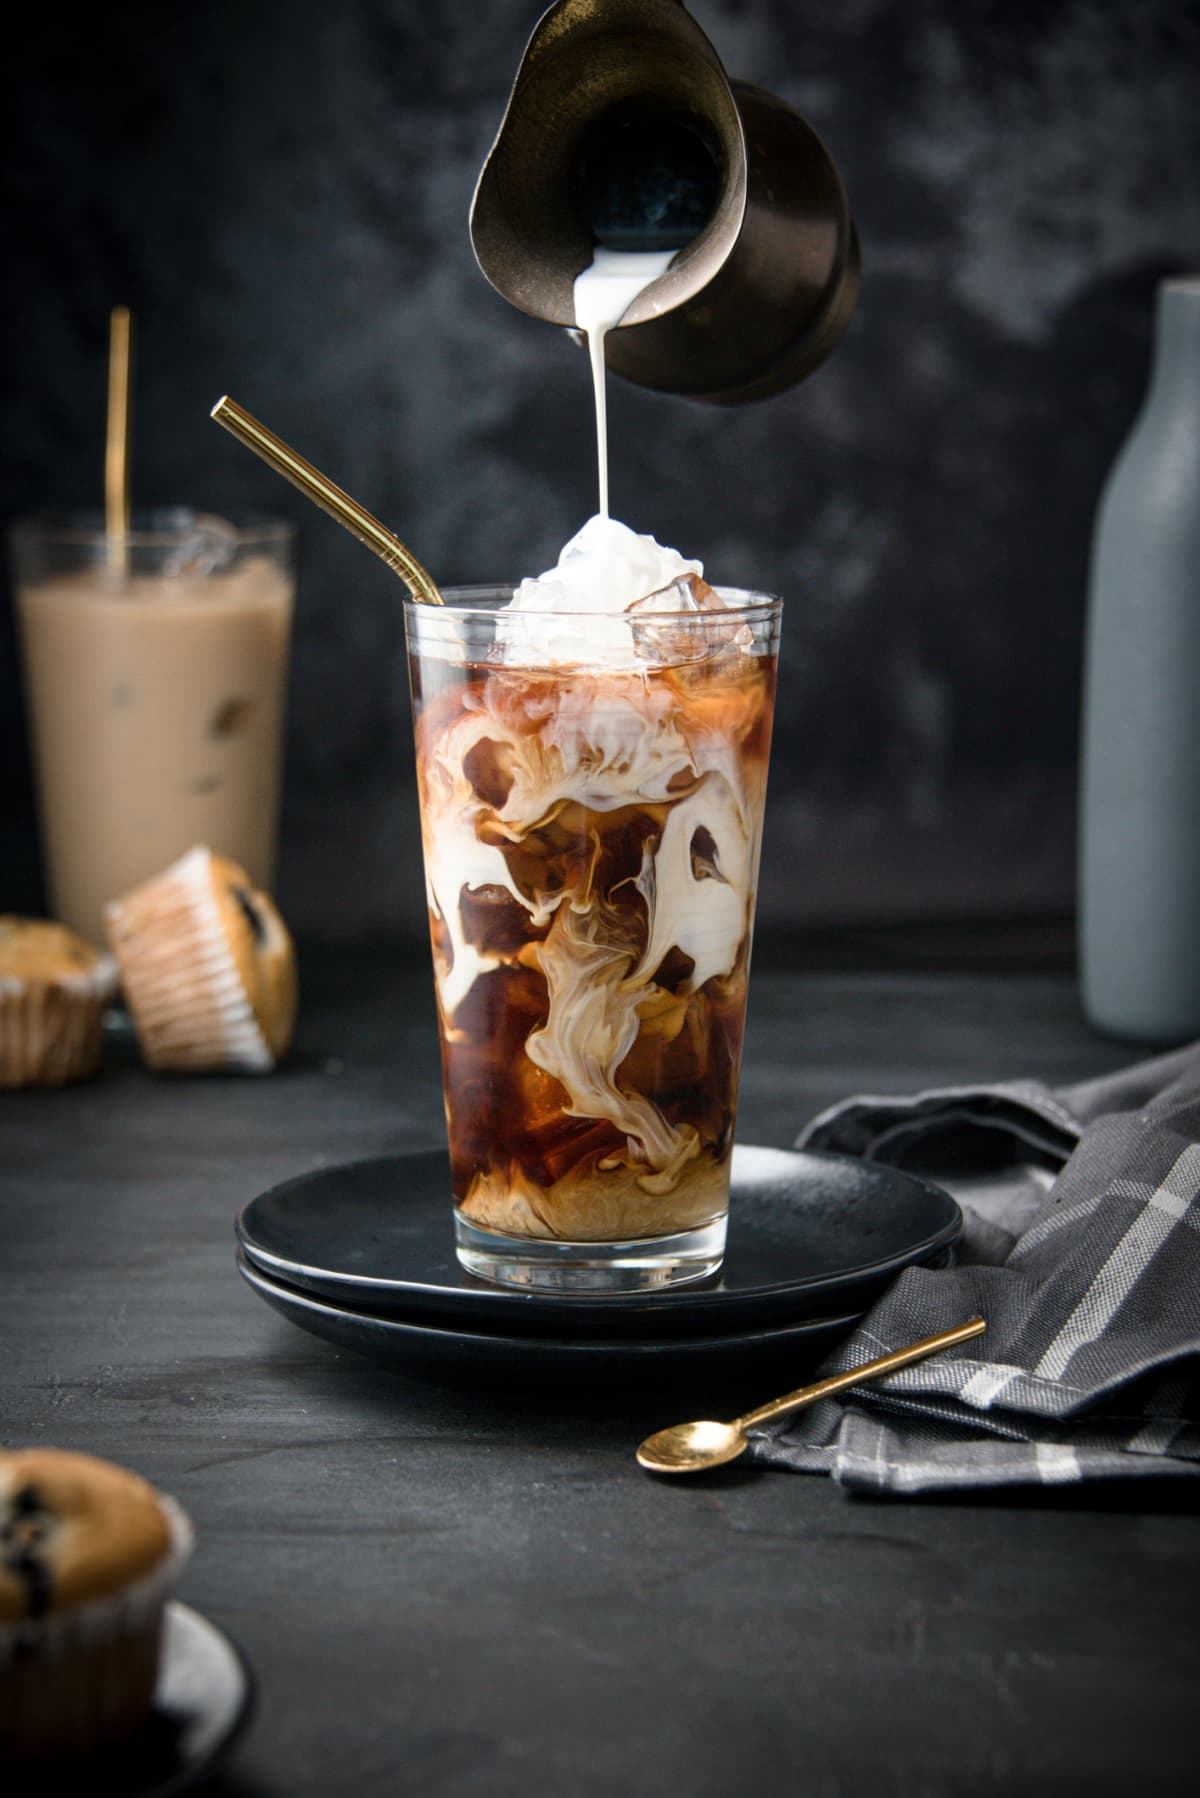 How Long Will Your Fancy Leftover Iced Coffee Last In The Fridge?